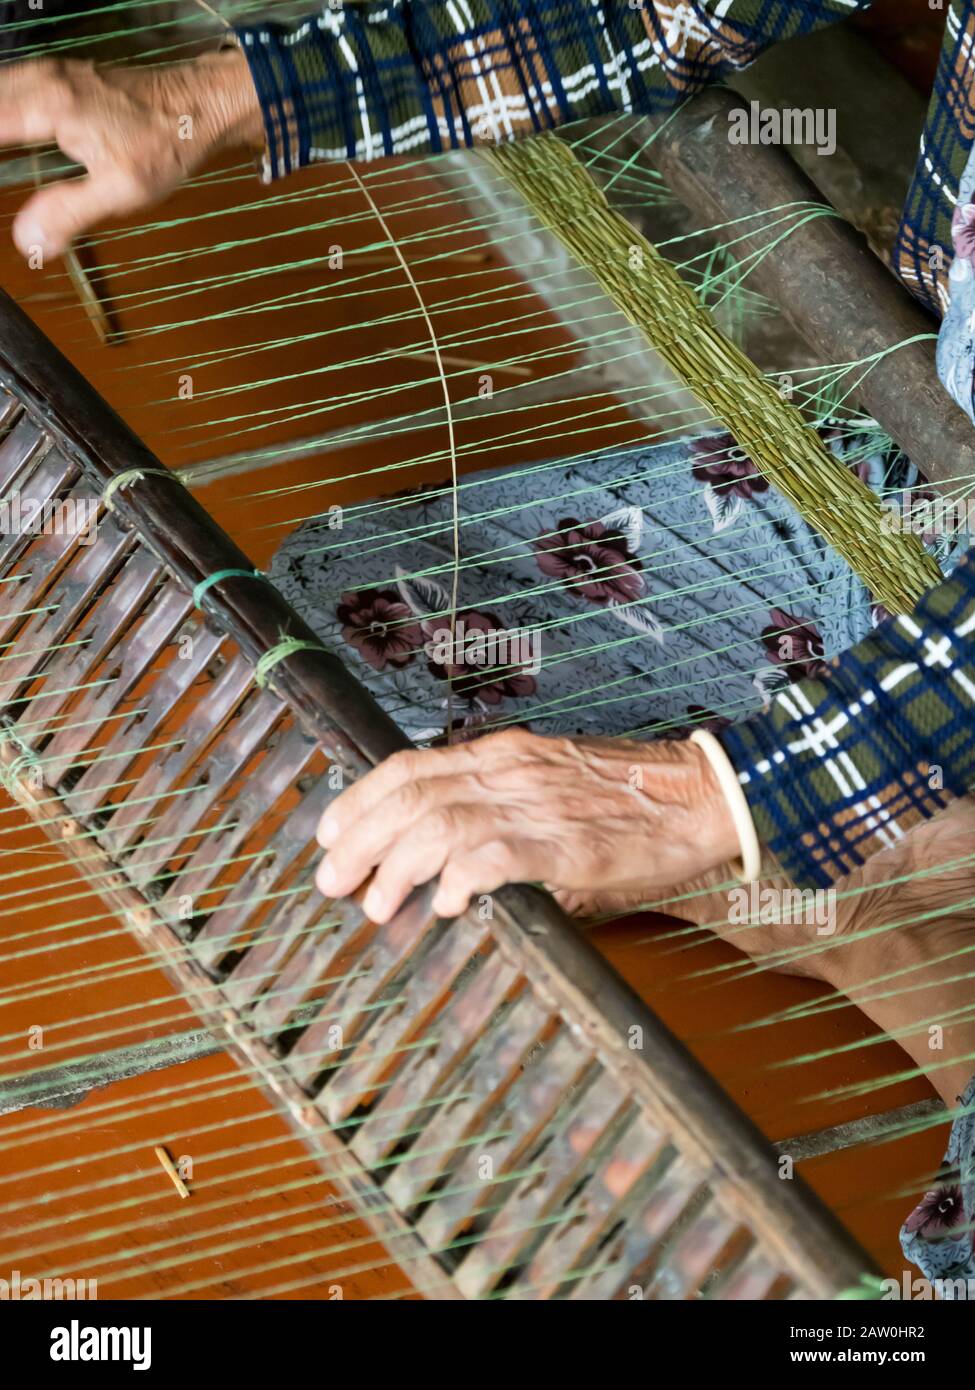 Traditional weaving of mats from a reed growing along the Mekong River in Vietnam Stock Photo